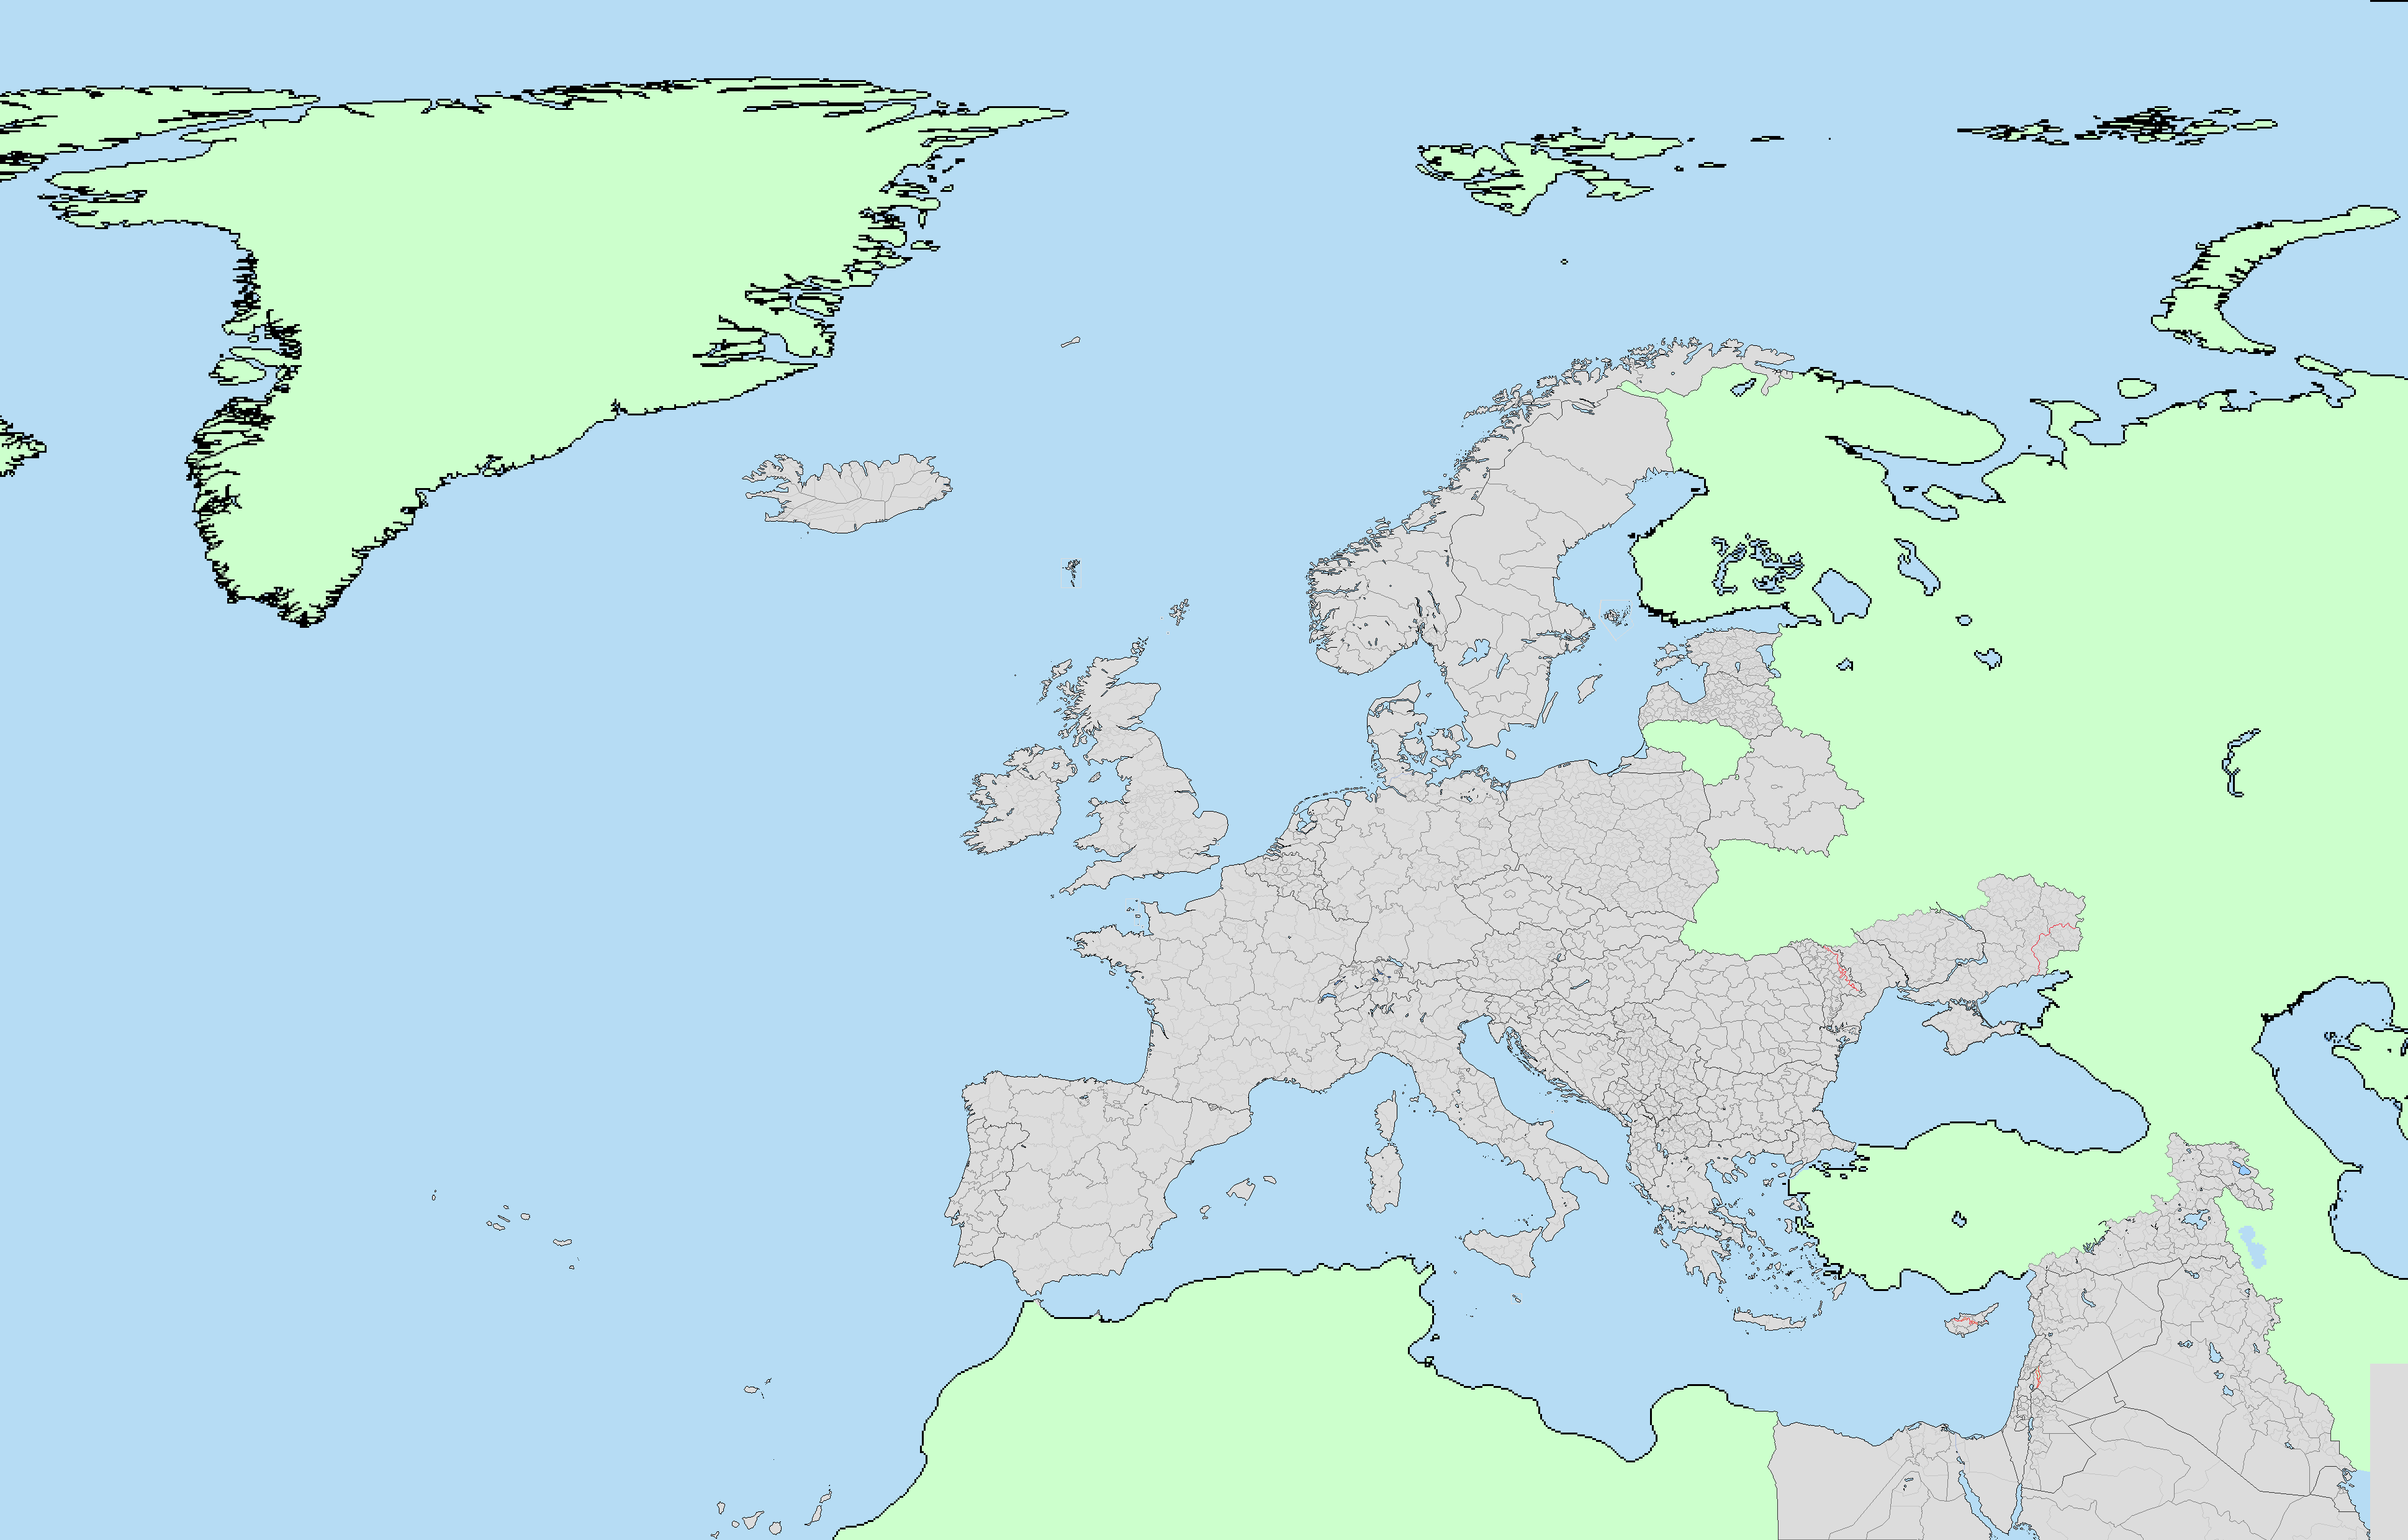 M bam. Map of Europe with Subdivisions. M-Bam blank Map. World Map Subdivisions. Europe Bam.